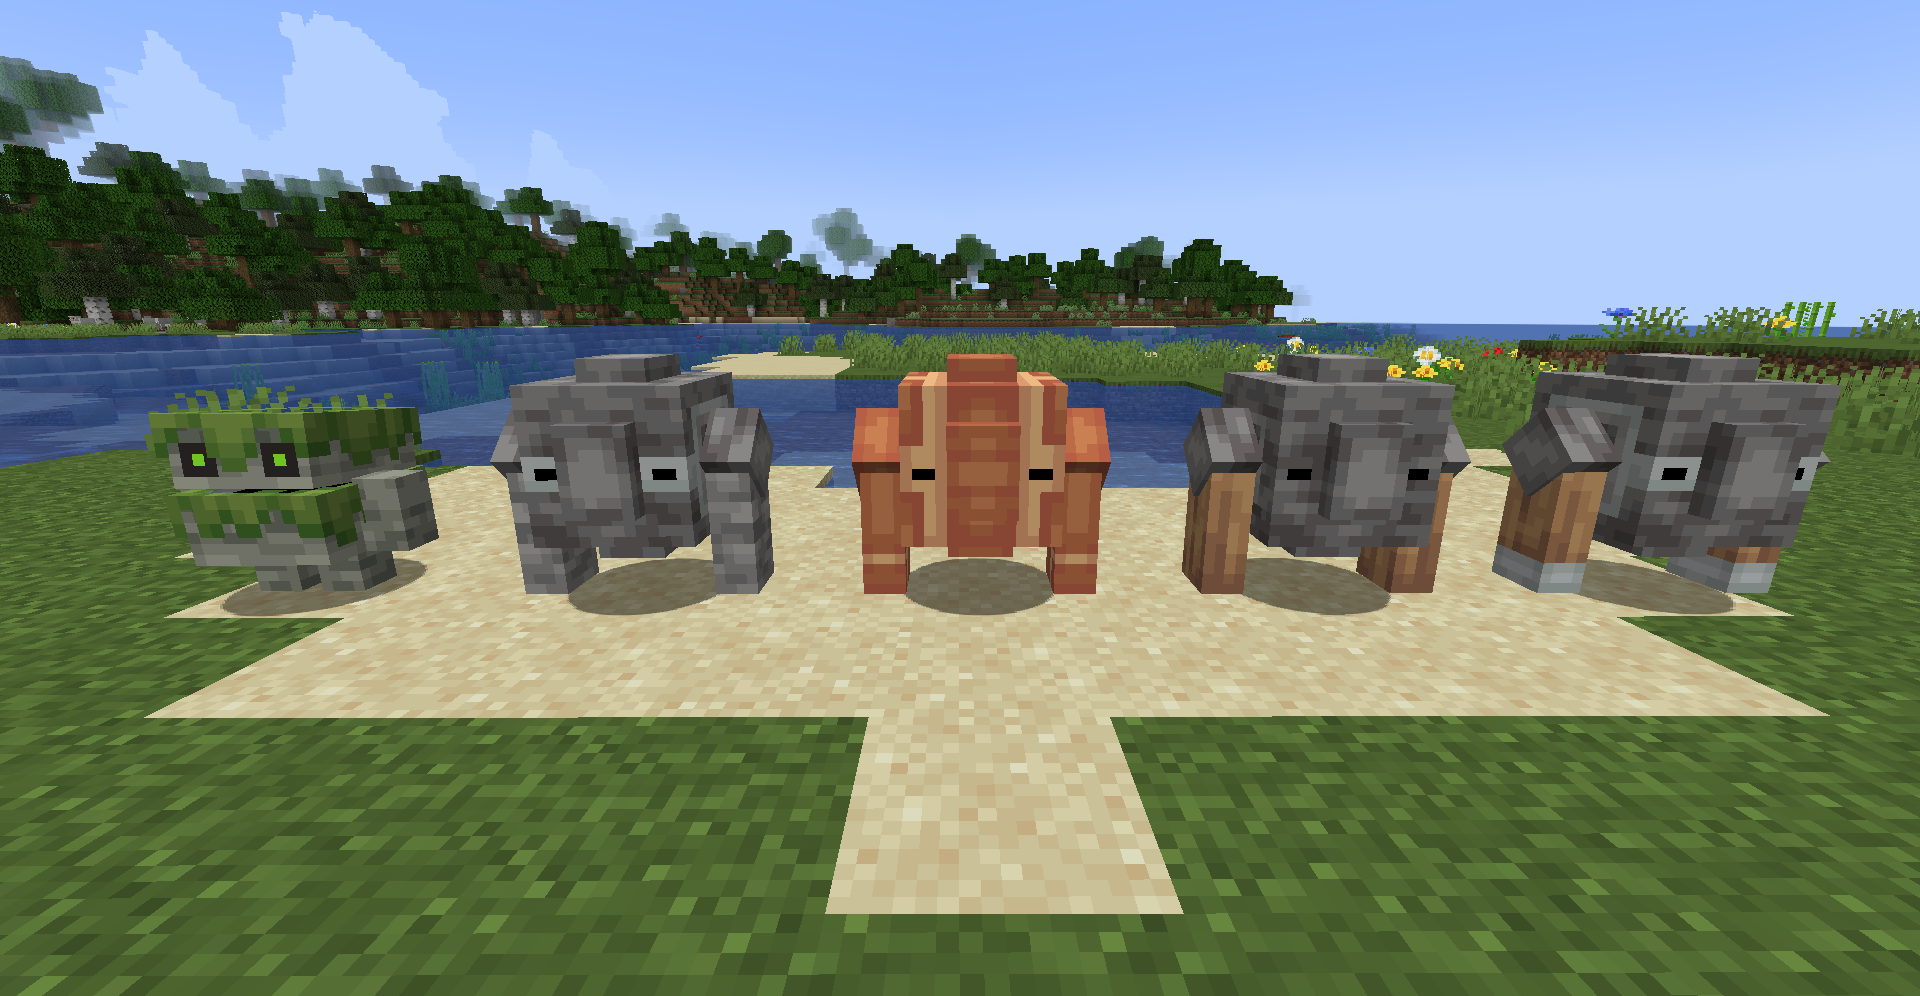 Grindstone and Mossy Golems